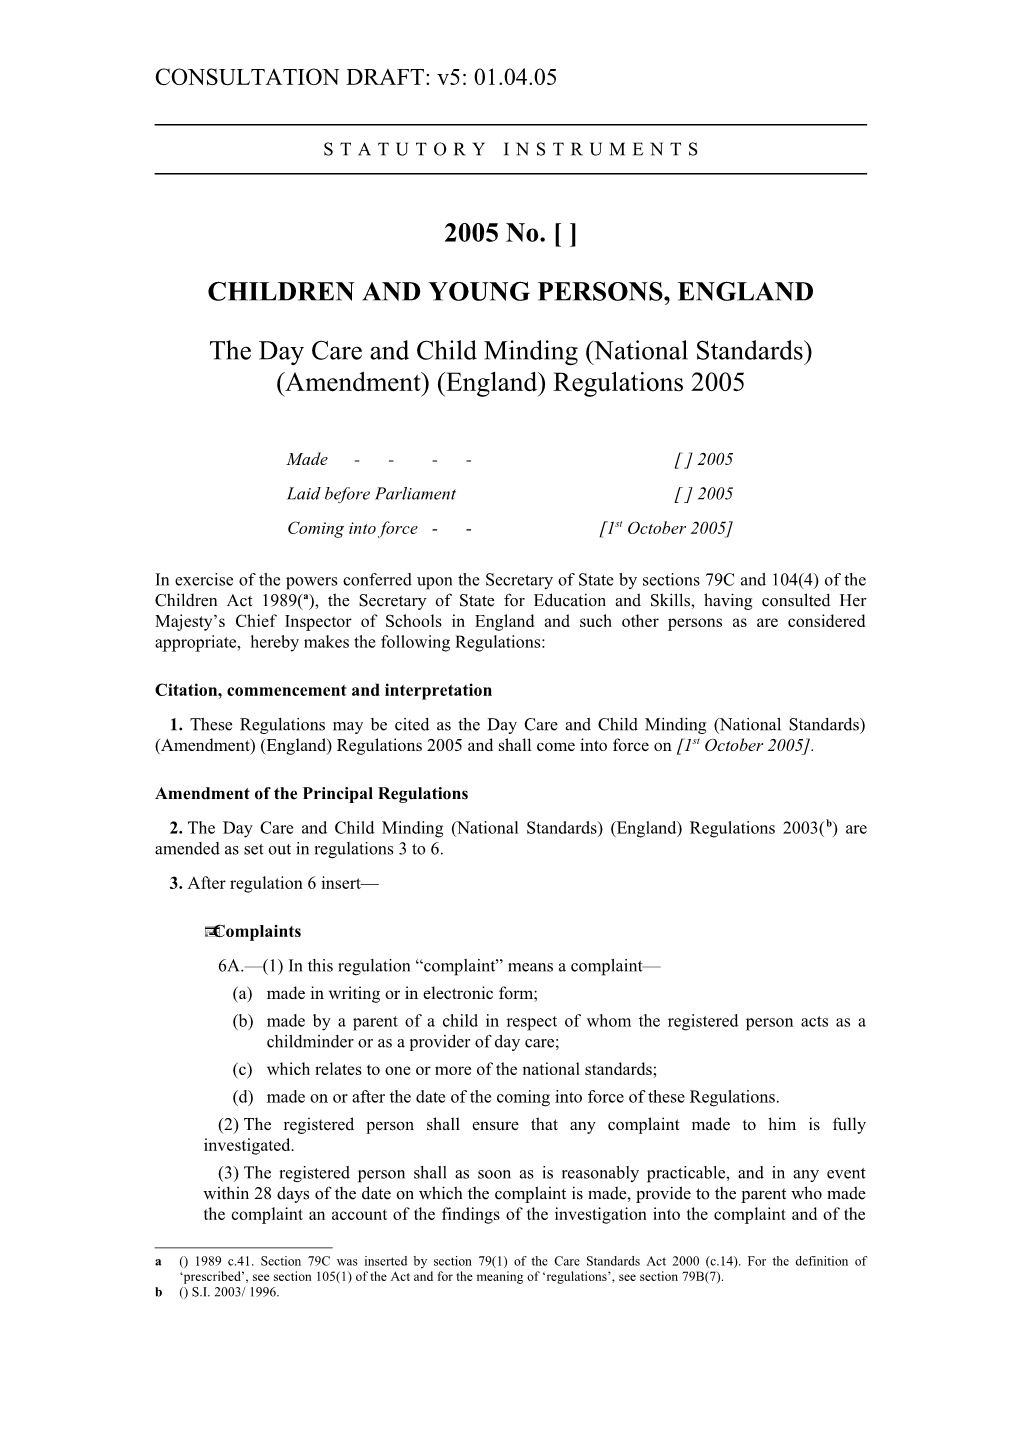 Children and Young Persons, England